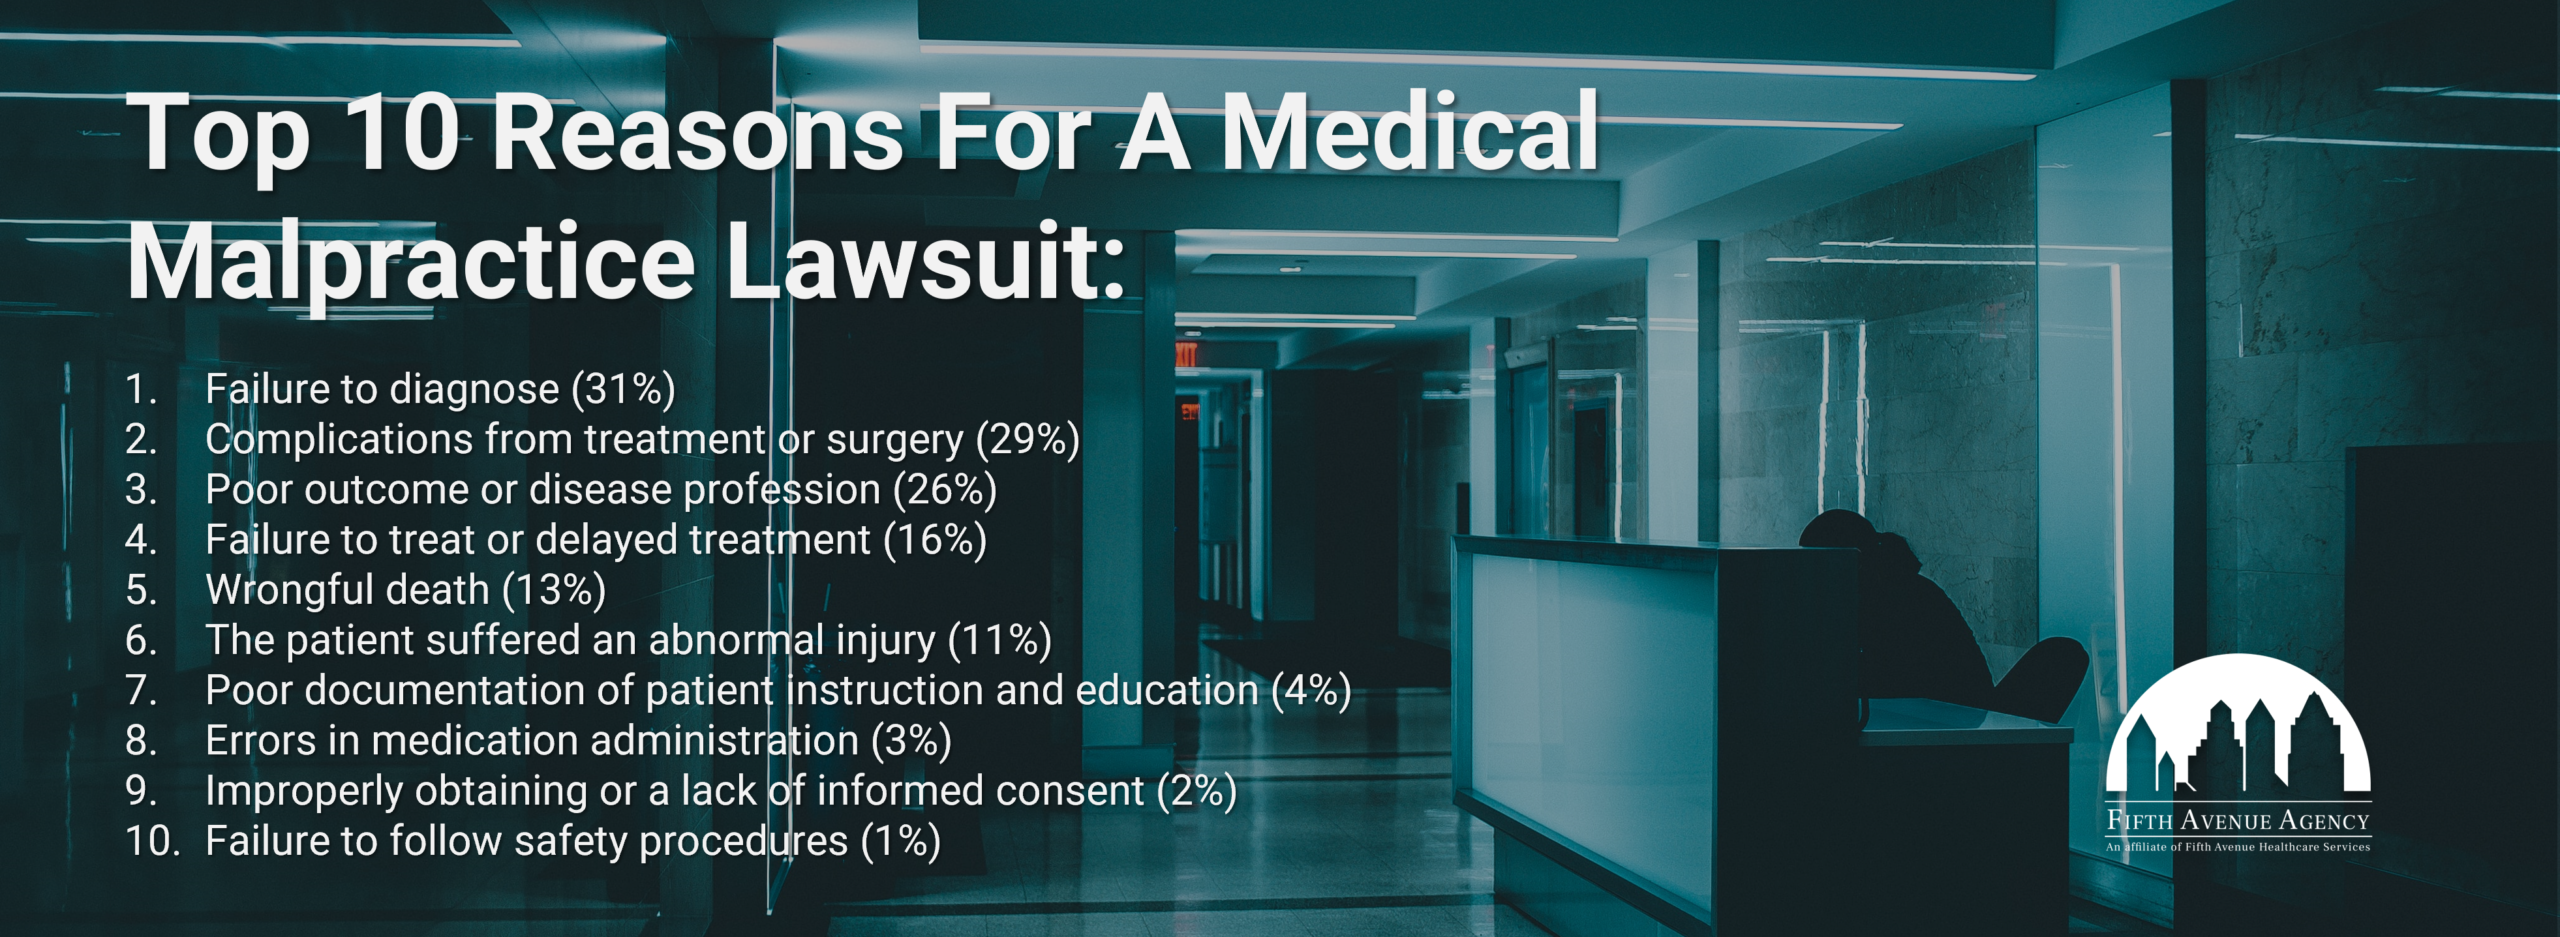 Top 10 Reasons For A Medical Malpractice Lawsuit